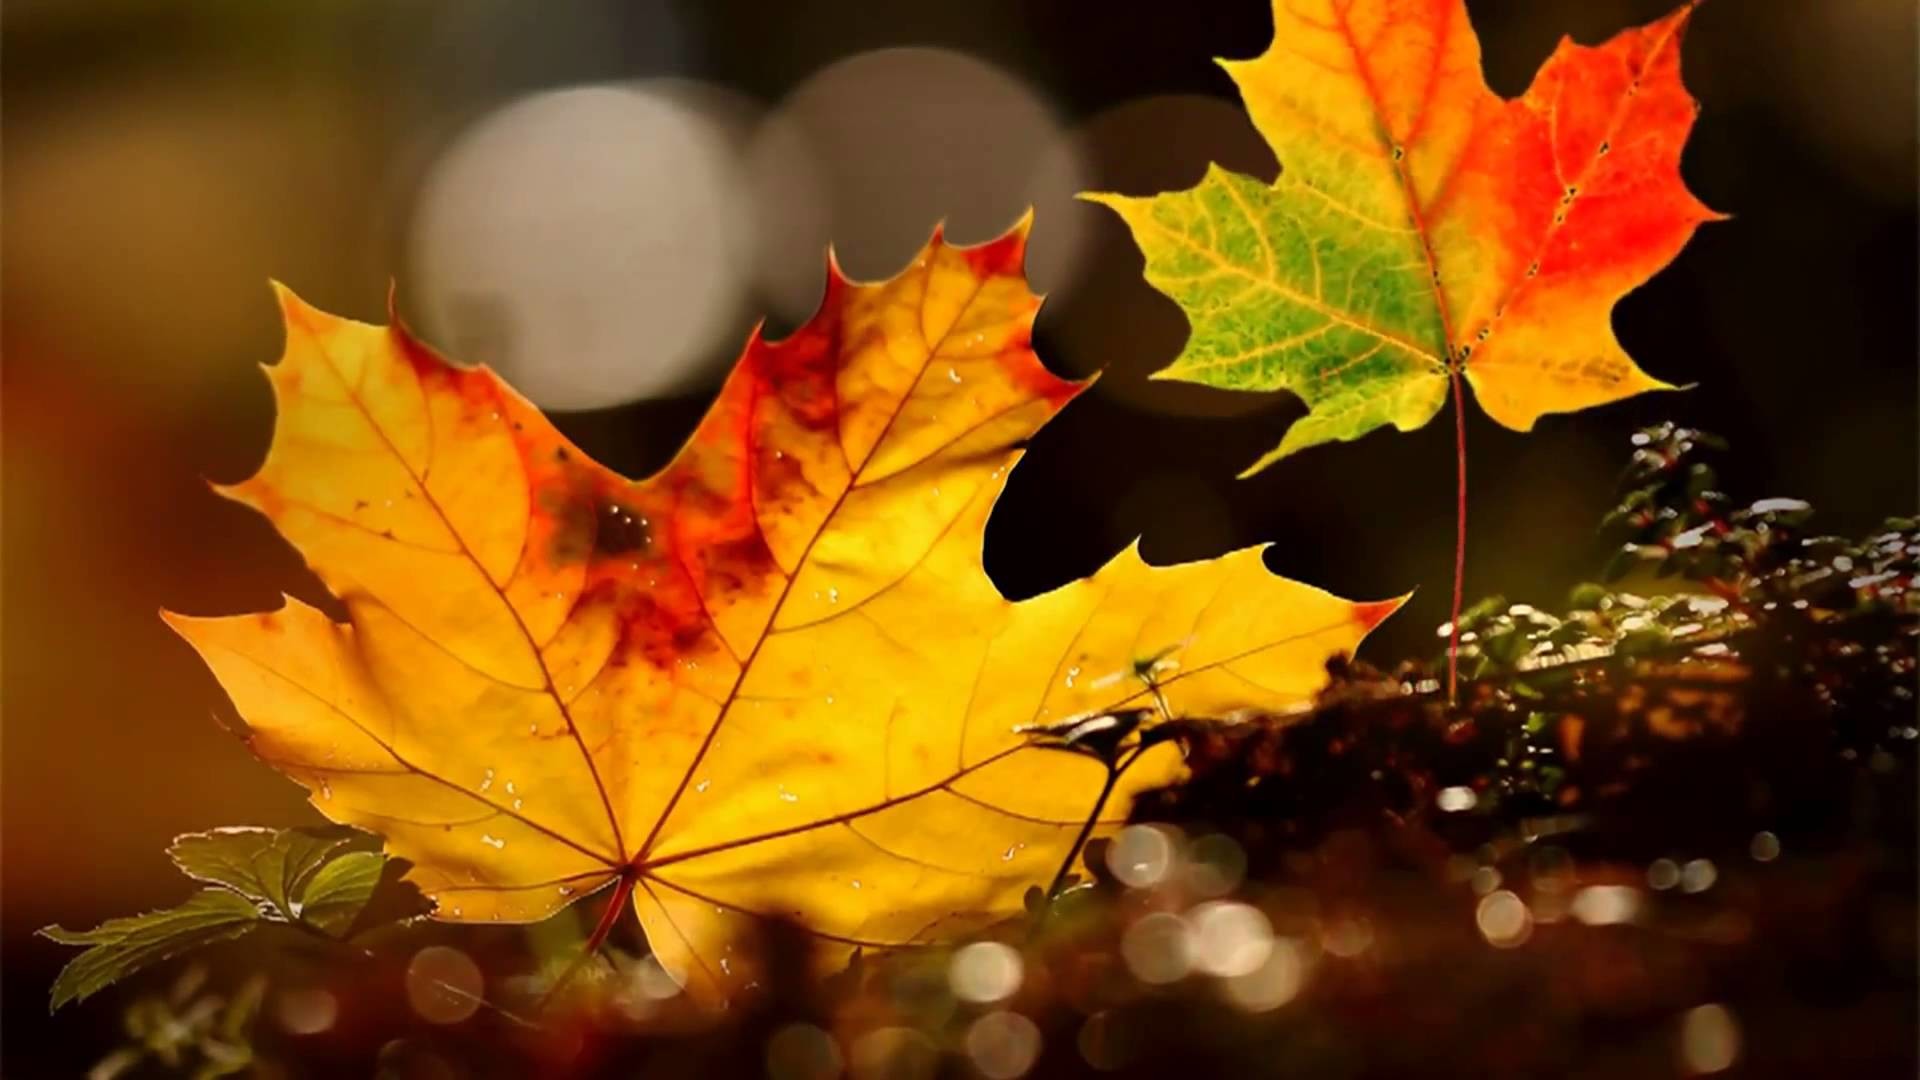 1920x1080 Video Background HD - Autumn leaves HD - Style Proshow - styleproshow.org -  YouTube